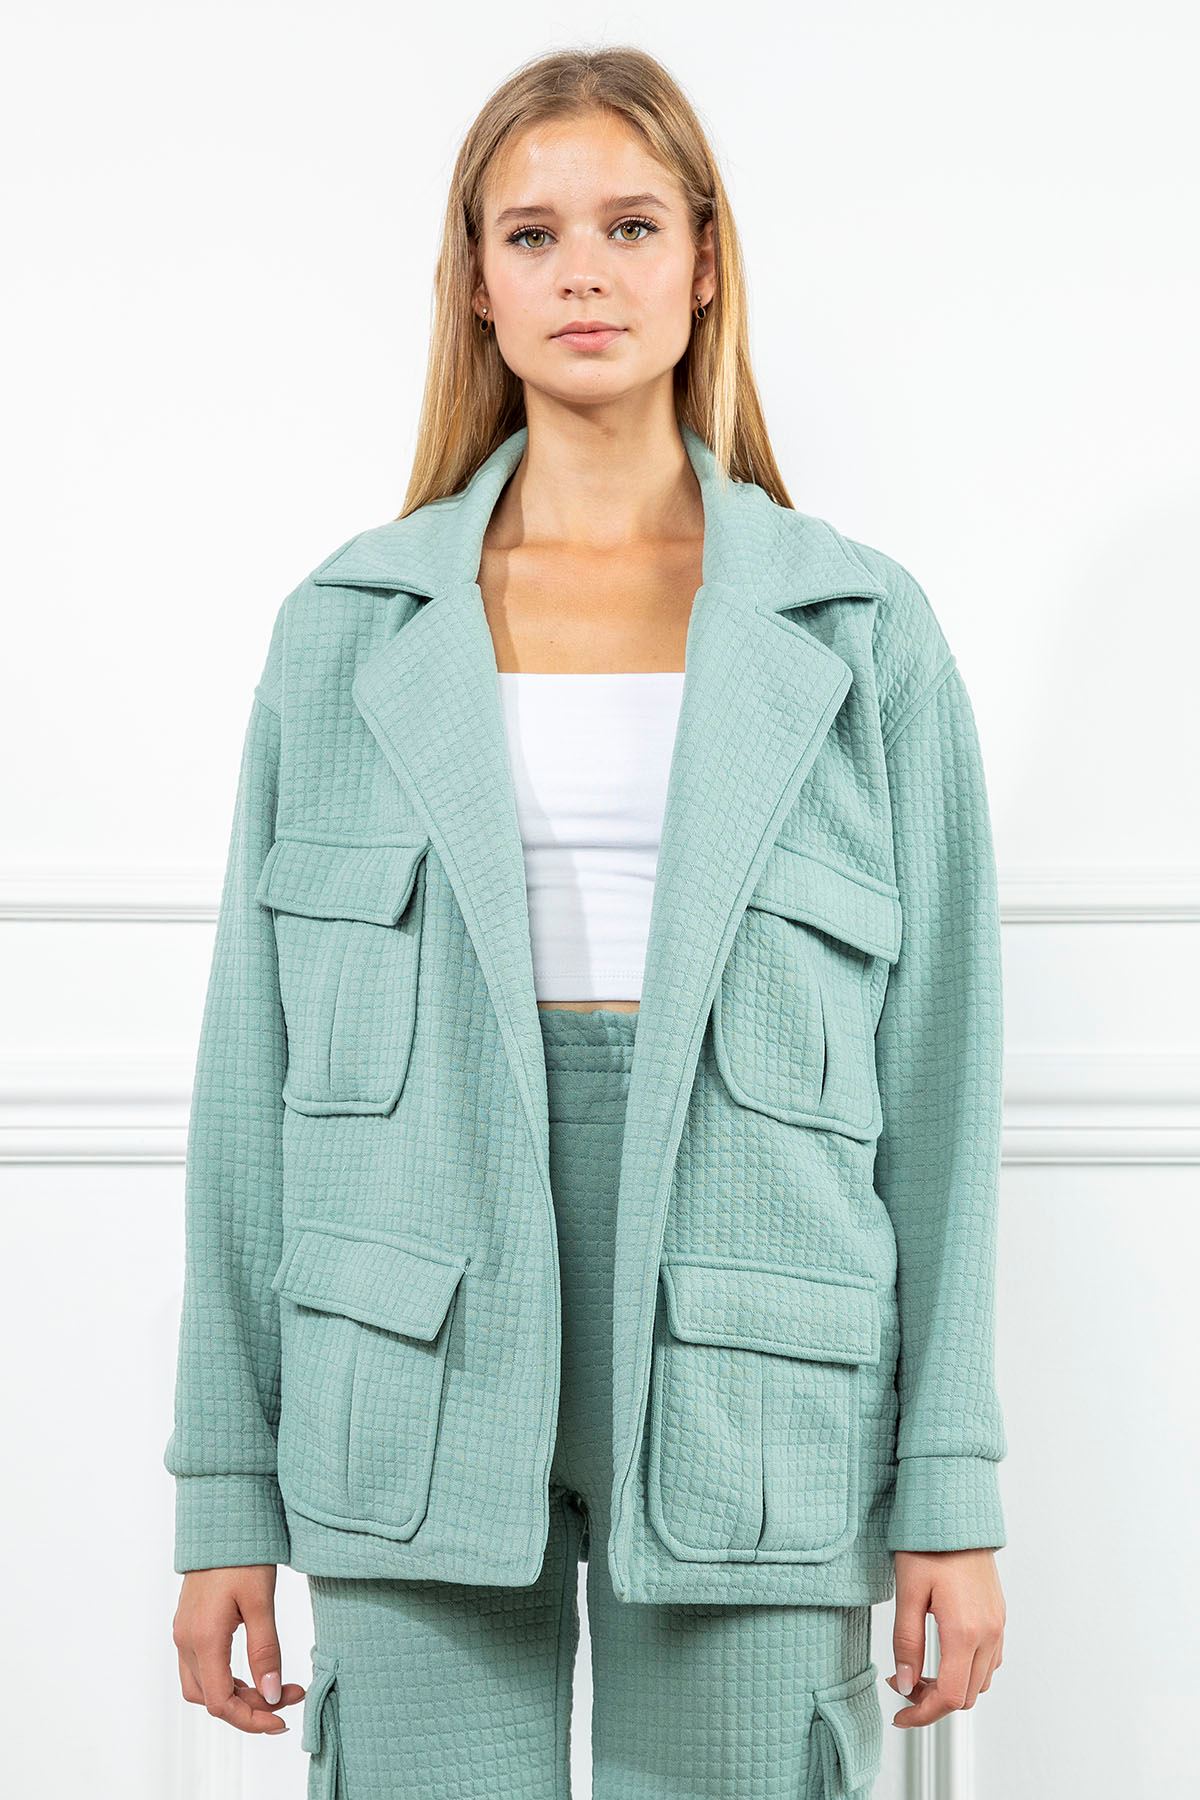 Quilted Fabric Bicycle Collar Oversize Double Pocket Women Sweatshirt - Mint